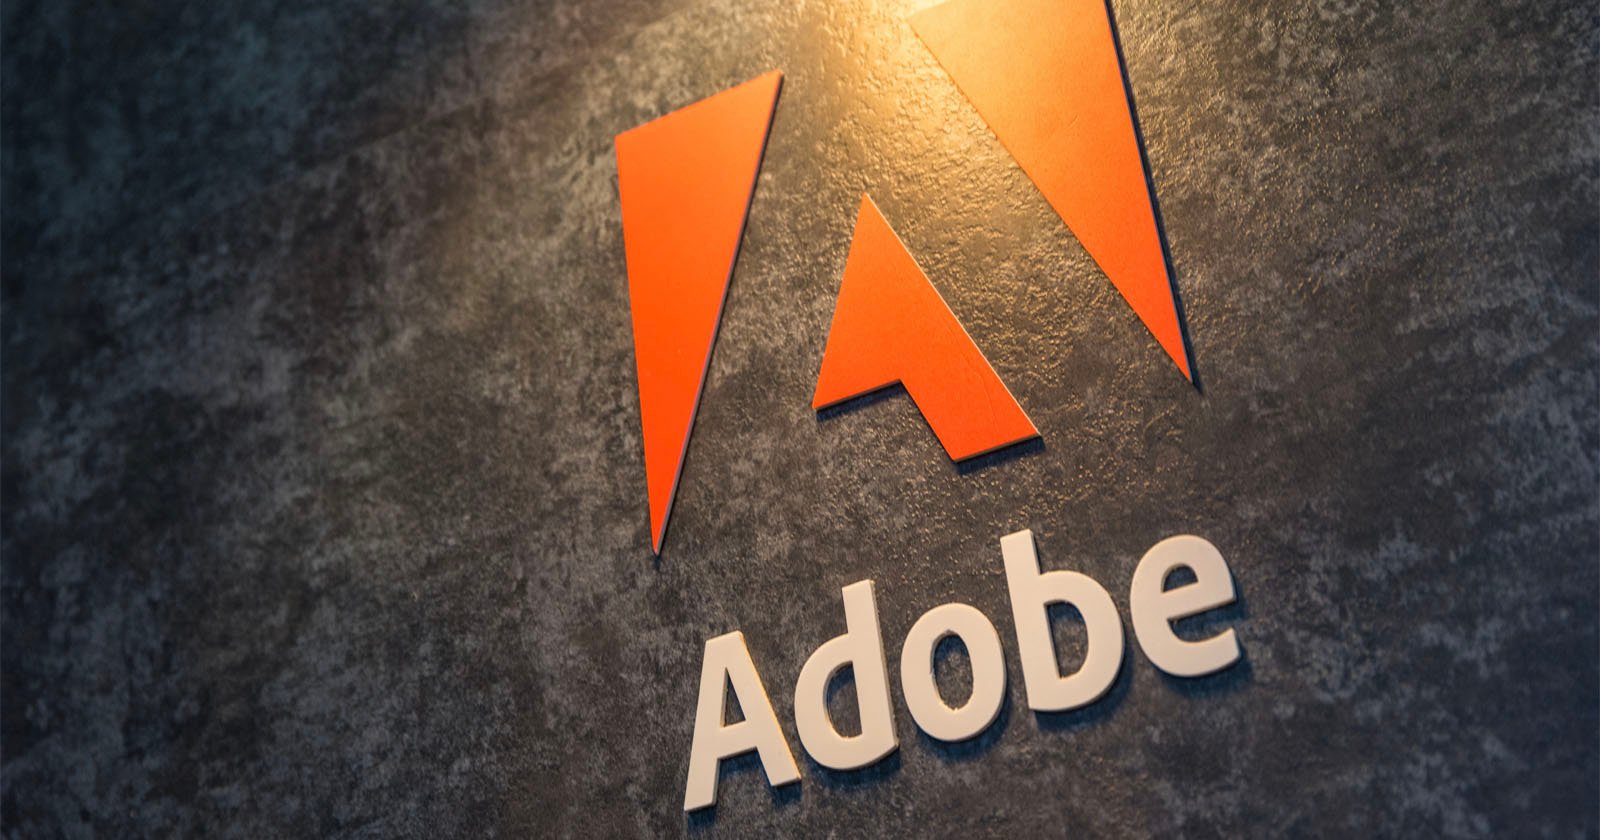 Close-up of the adobe logo with a stylized "a" in orange above the word "adobe" in white, affixed to a textured dark gray wall.